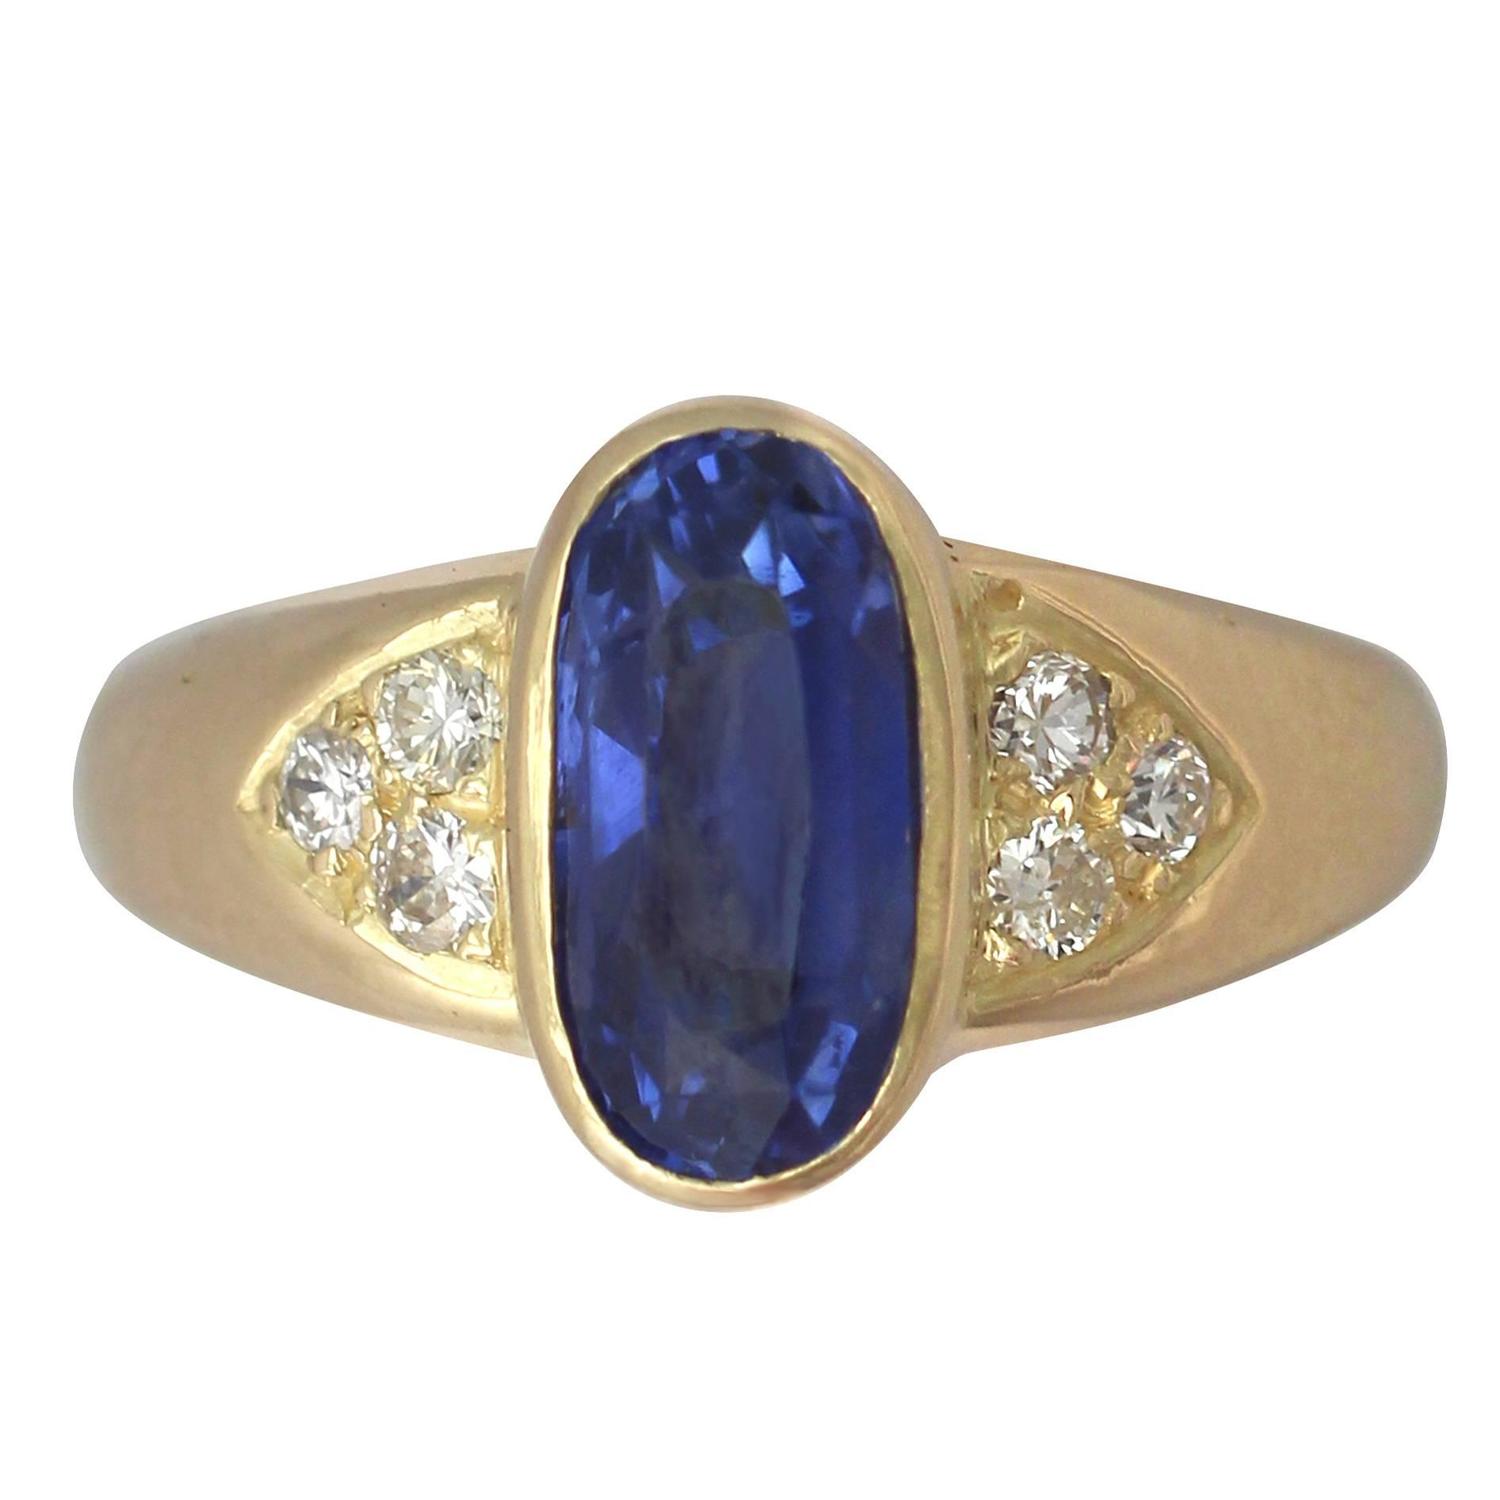 French 3.39 Carat Sapphire Diamond Gold Dress Ring For Sale at 1stdibs